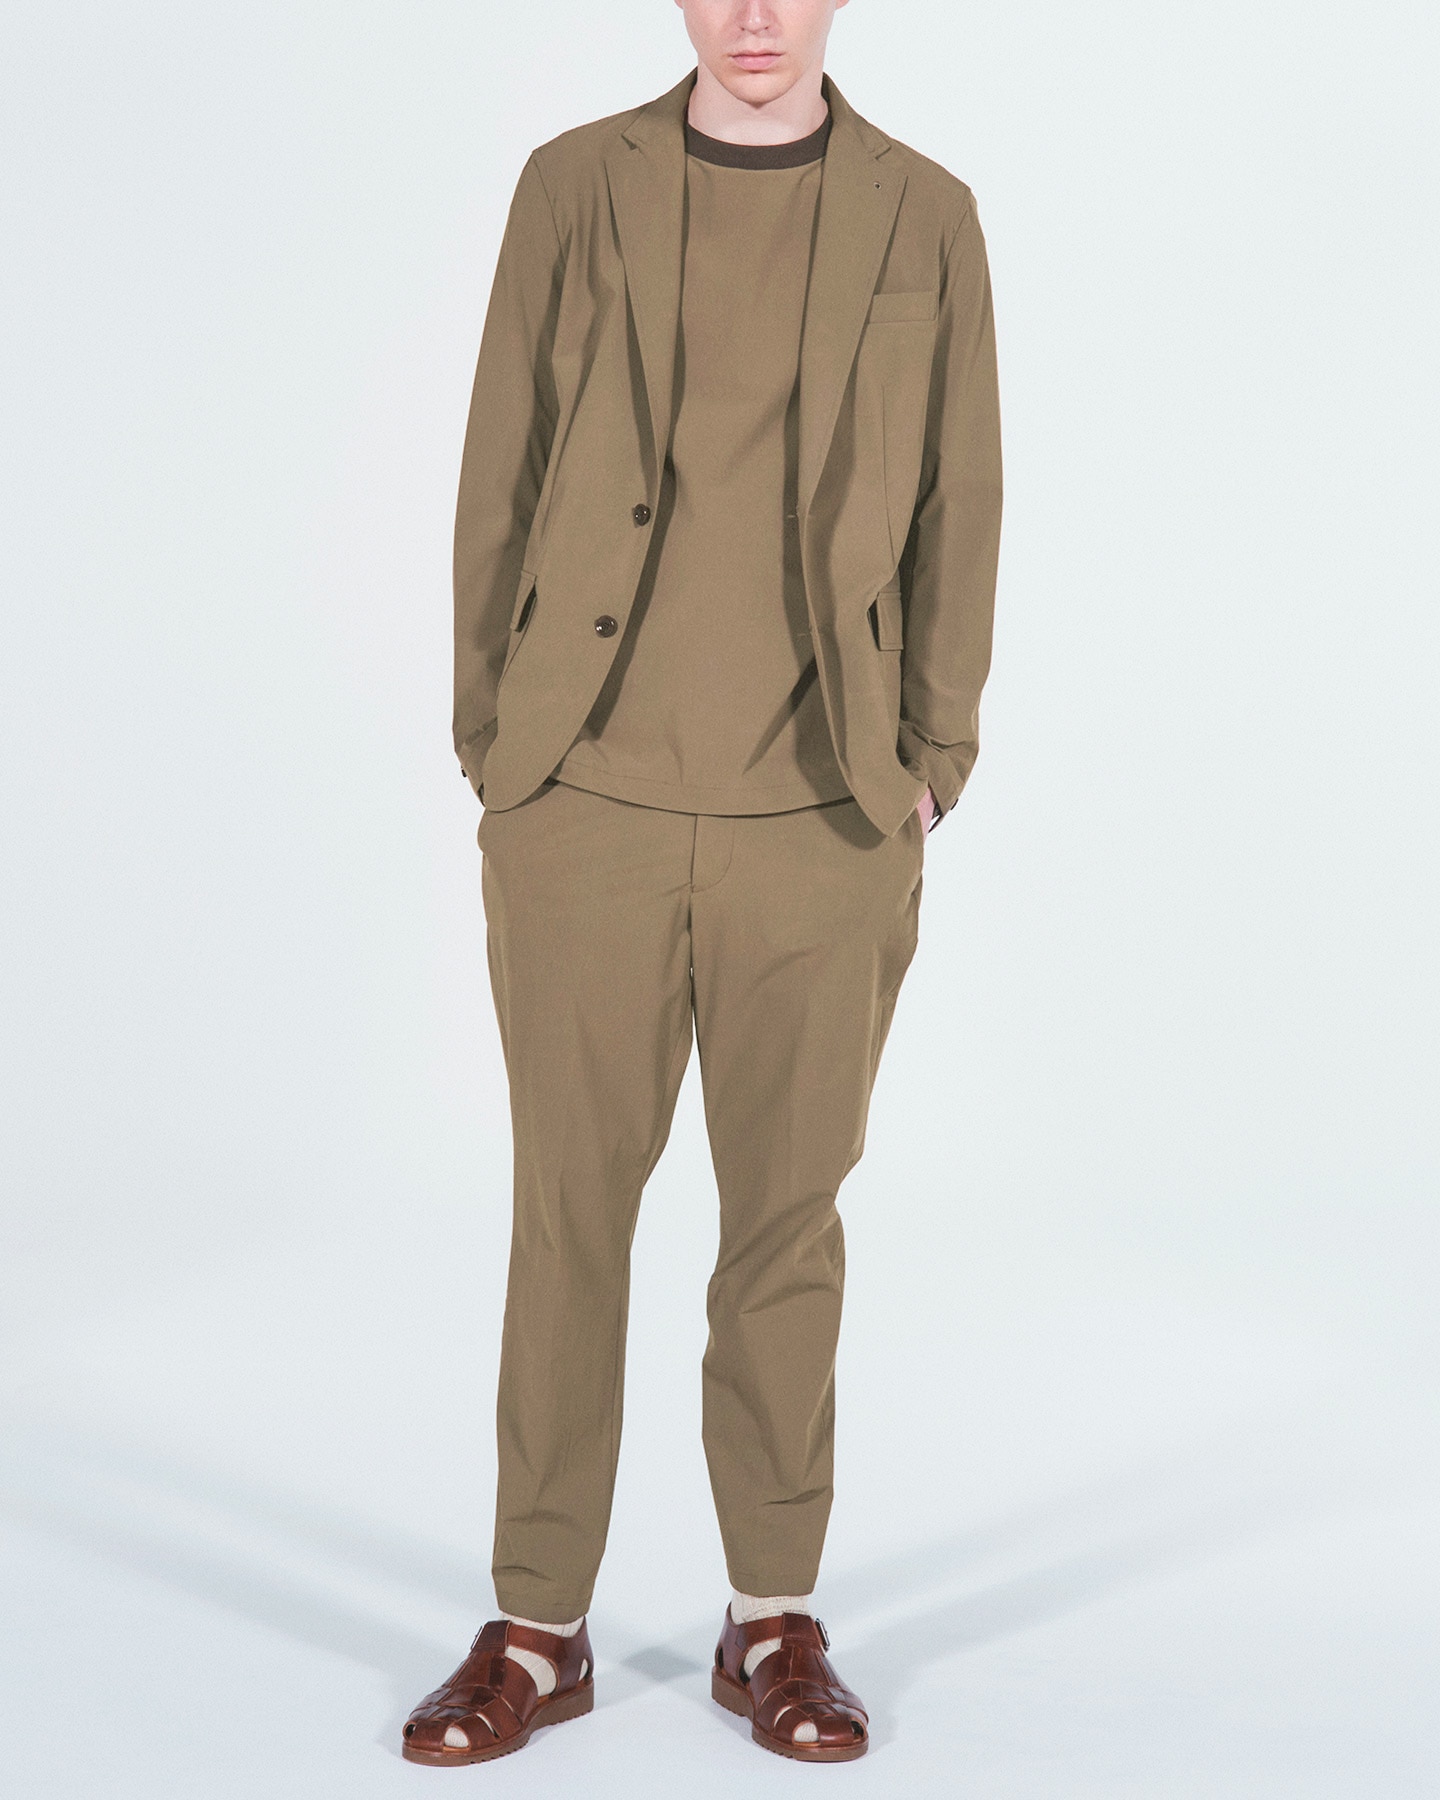 SOPH. | 2WAY STRETCH PACKABLE 2BUTTON JACKET(M LIGHT BROWN):